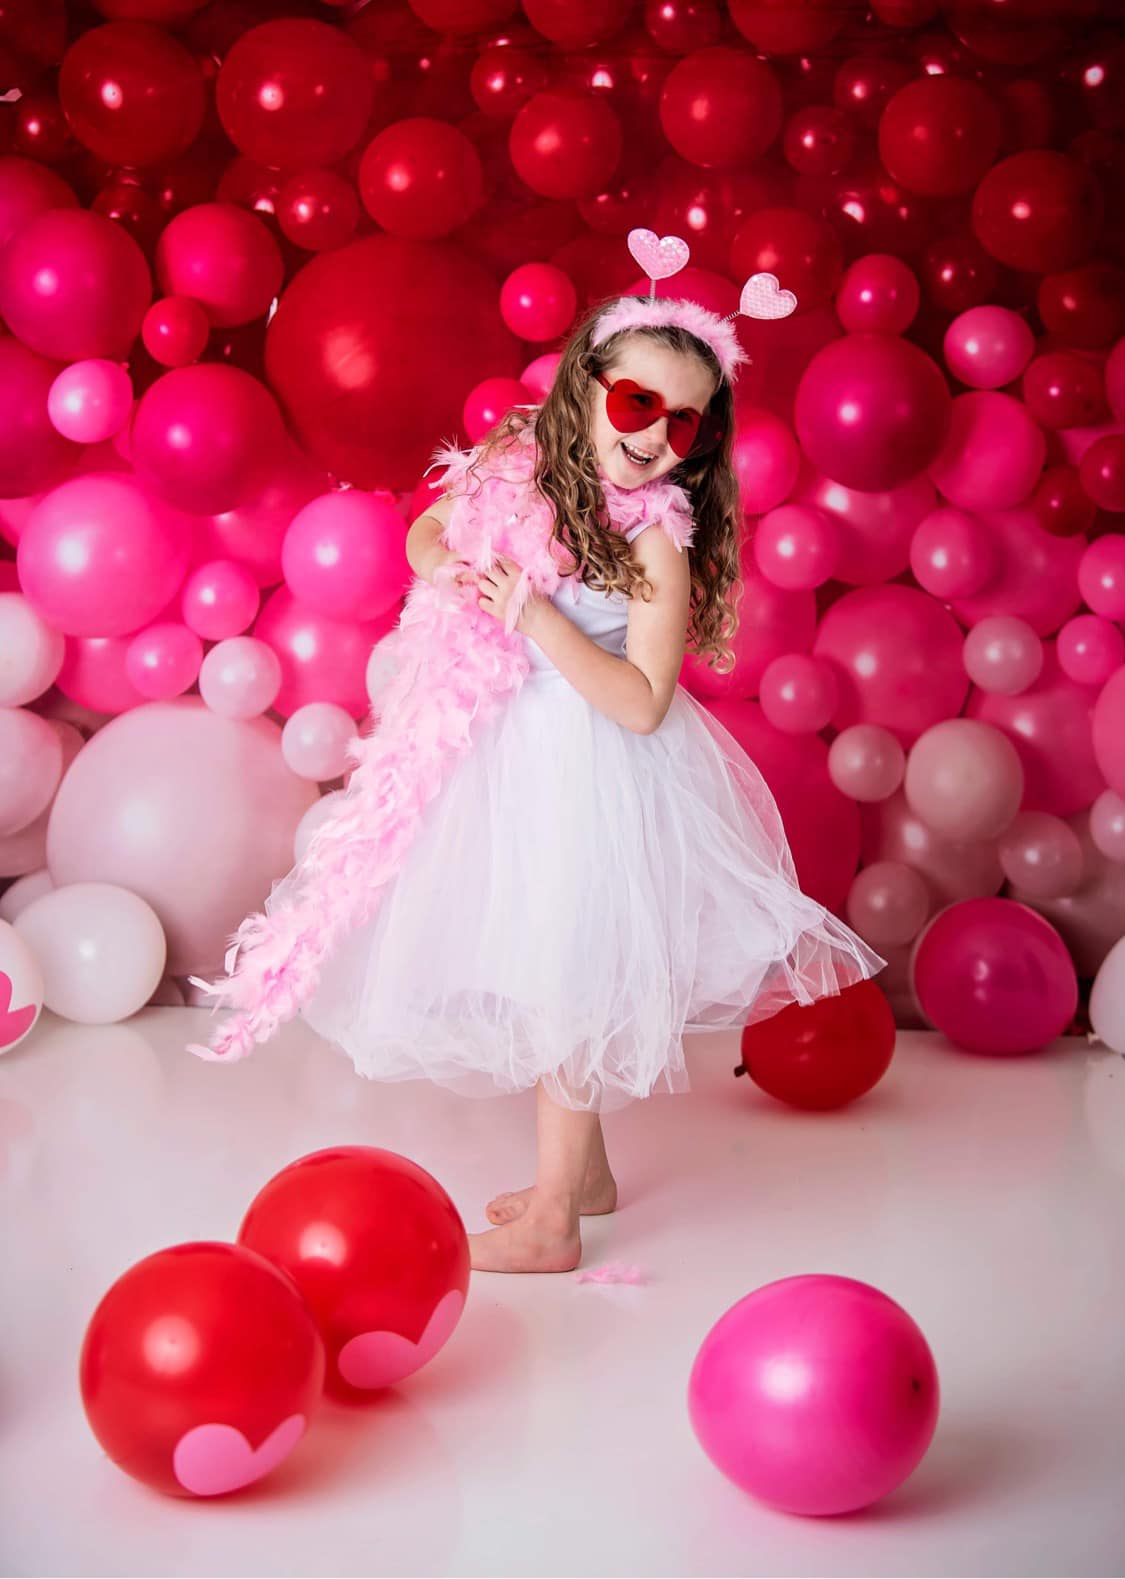 Kate Red Balloon Wall Valentine's Day Birthday Cake Smash Party Backdrop for Photography Designed by Mandy Ringe Photography